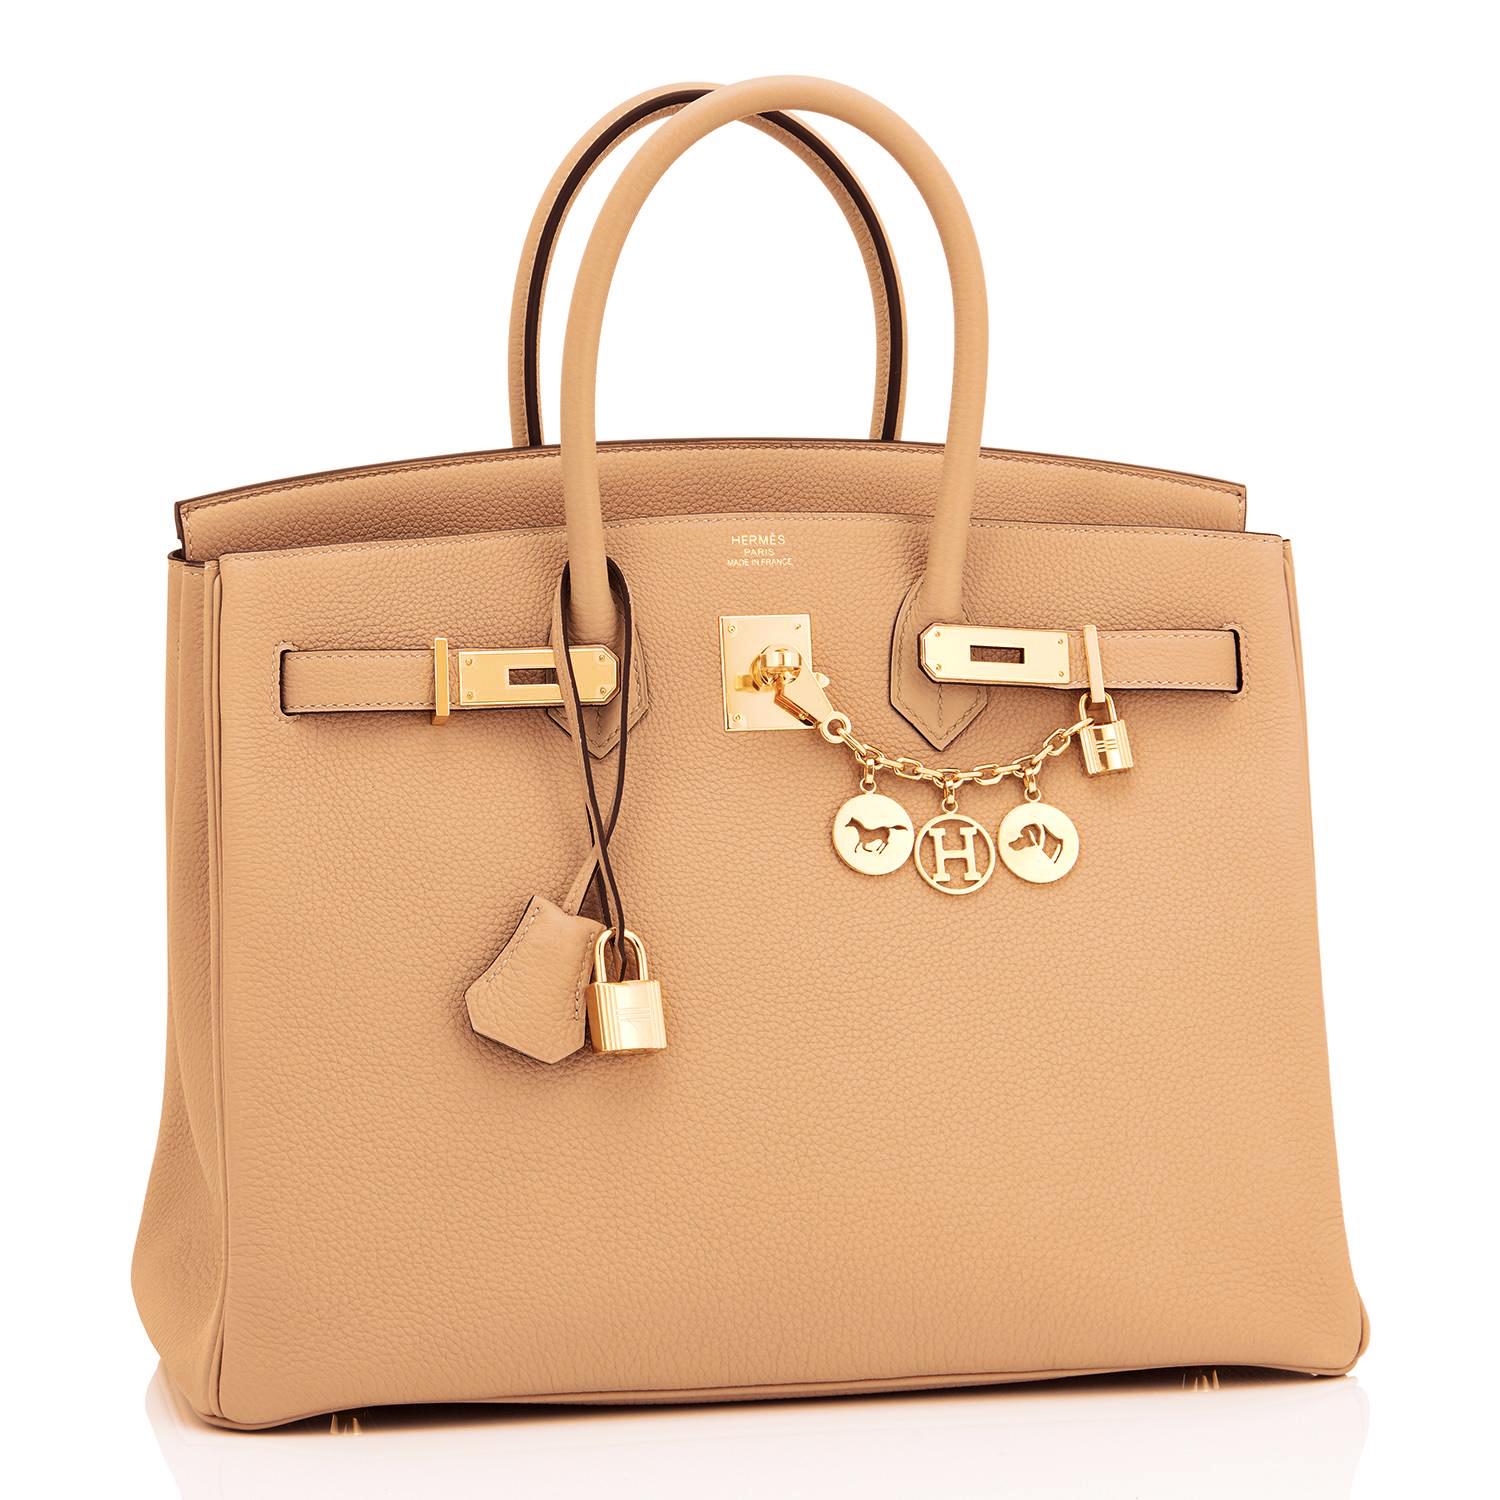 Hermes Birkin 35cm Biscuit Gold Togo Beige Tan Bag Z Stamp, 2021 RARE
Brand New in Box.  Store Fresh. Pristine condition (with plastic on hardware).
Just purchased from Hermes store, bag bears new 2021 interior Z Stamp.
Perfect gift! Comes with